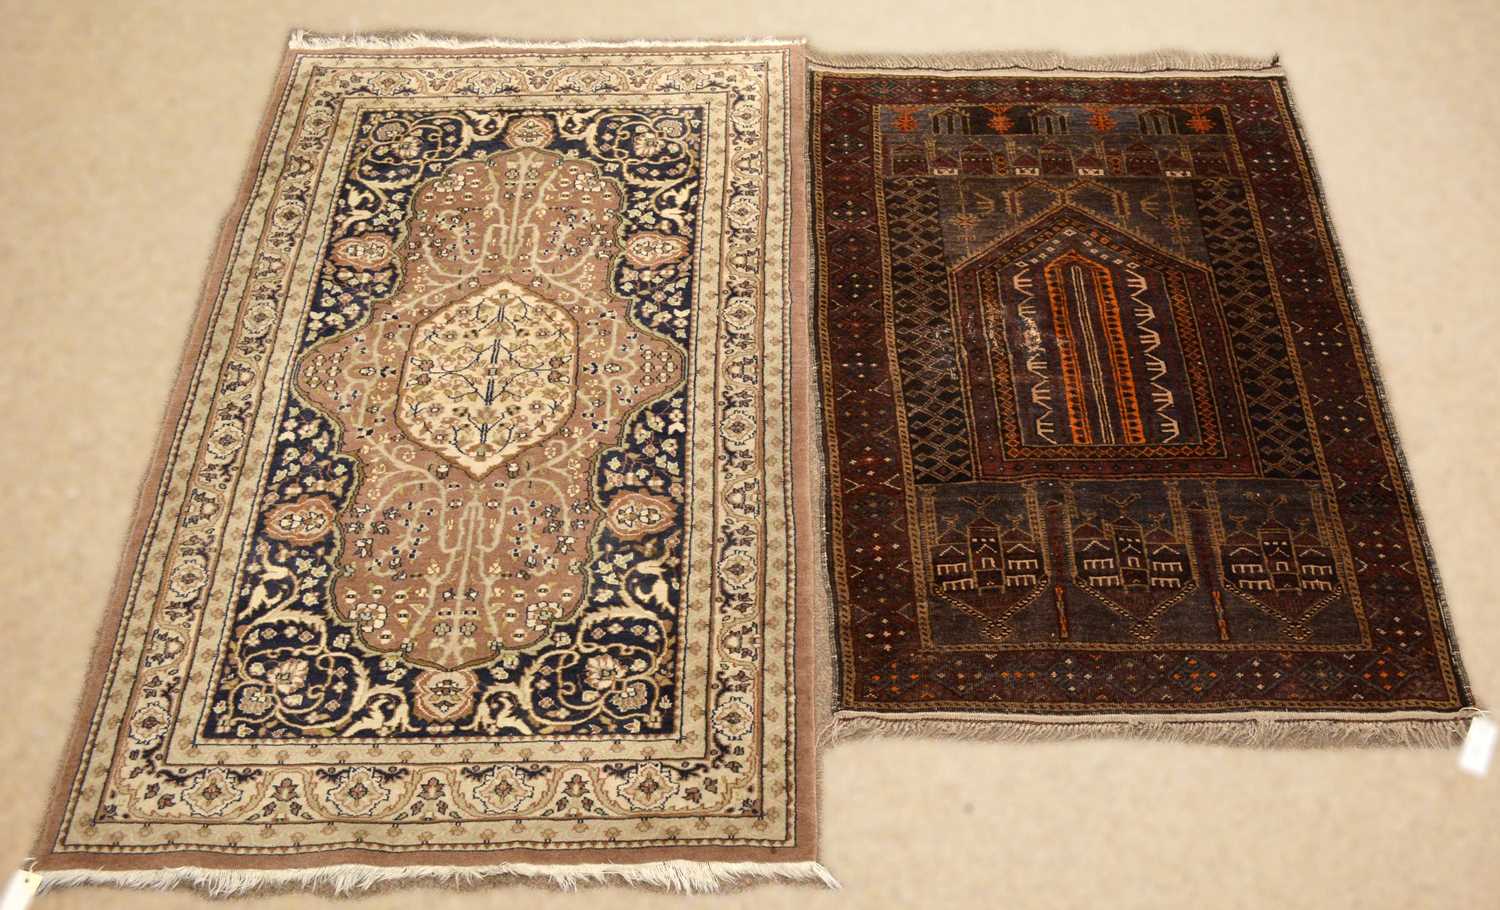 A Persian Nain rug, together with another